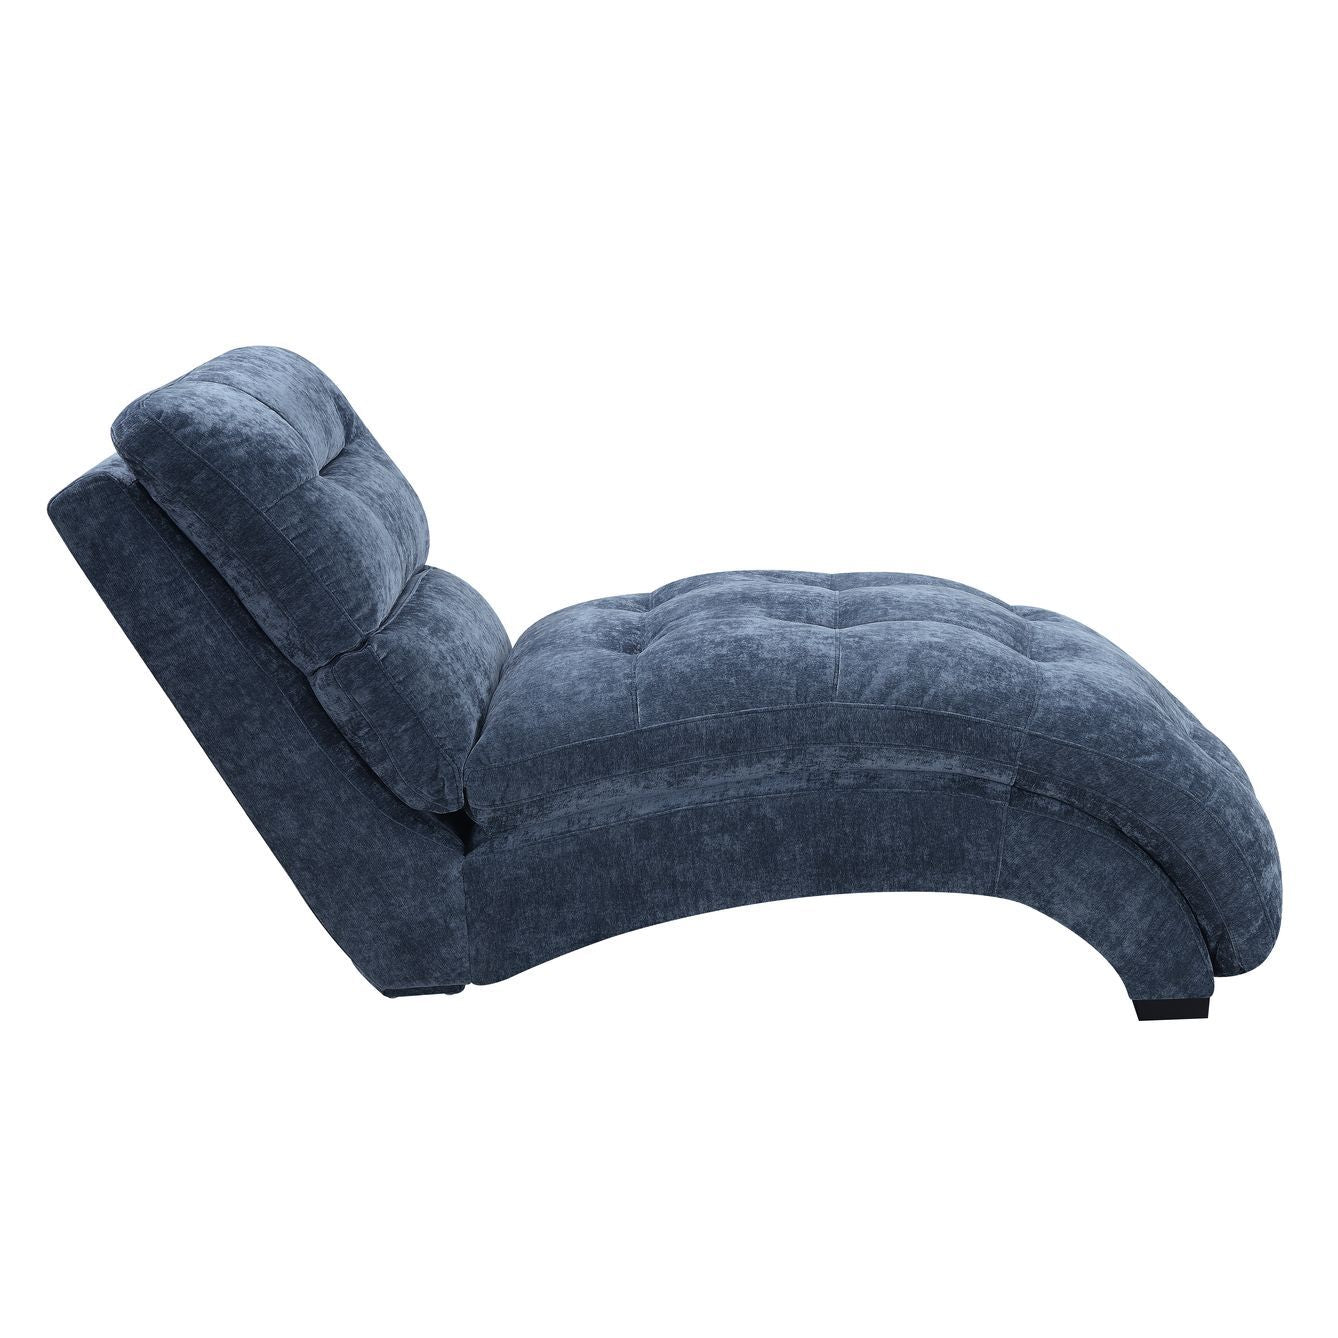 Dominick - Chaise